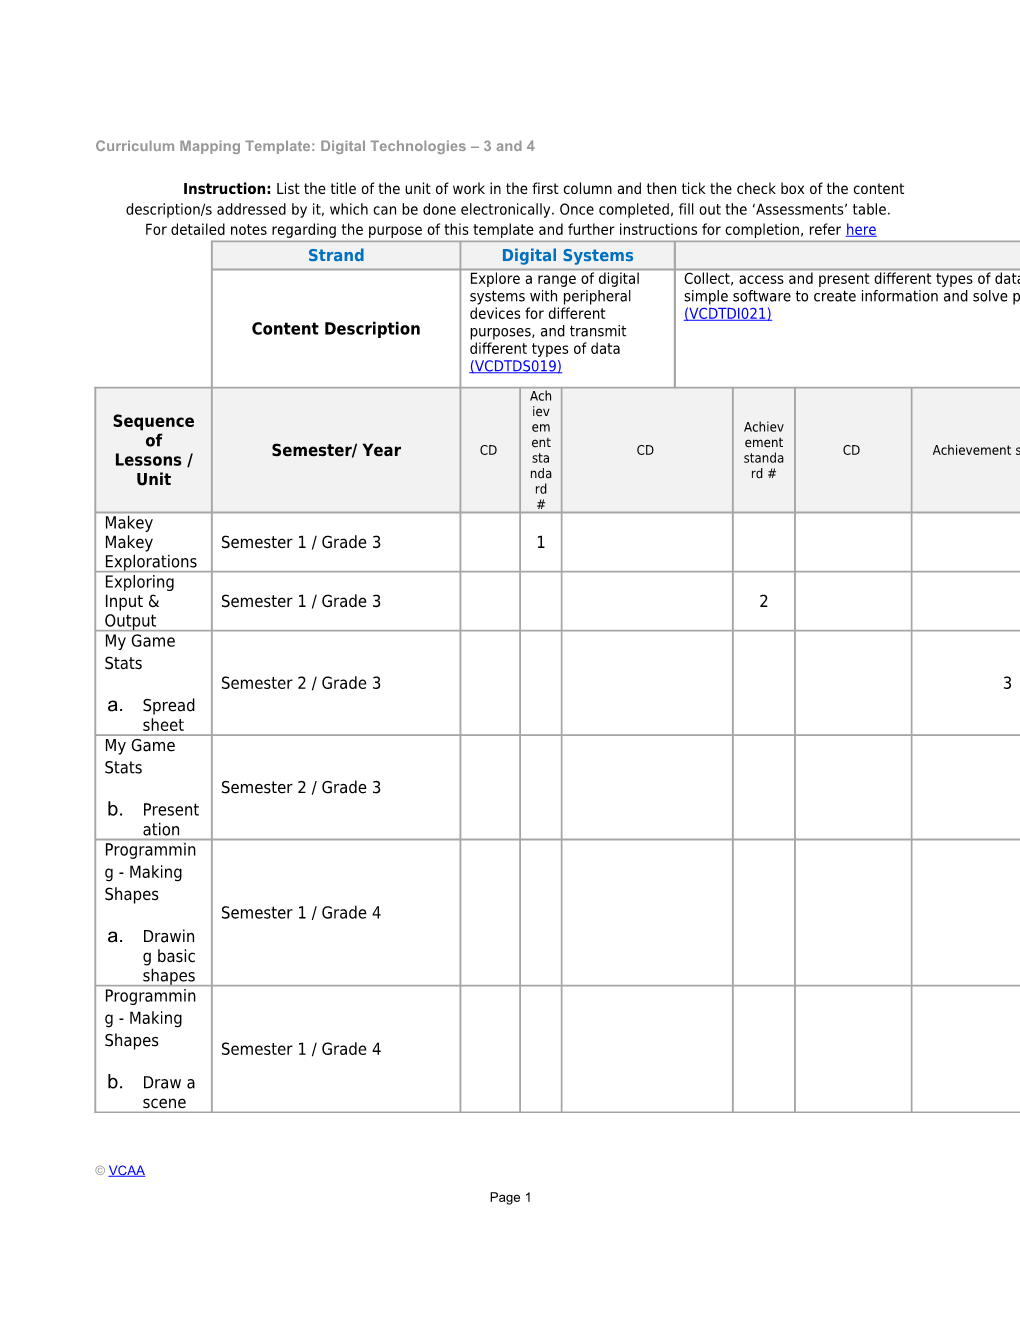 Curriculum Mapping Template: Digital Technologies 3 and 4